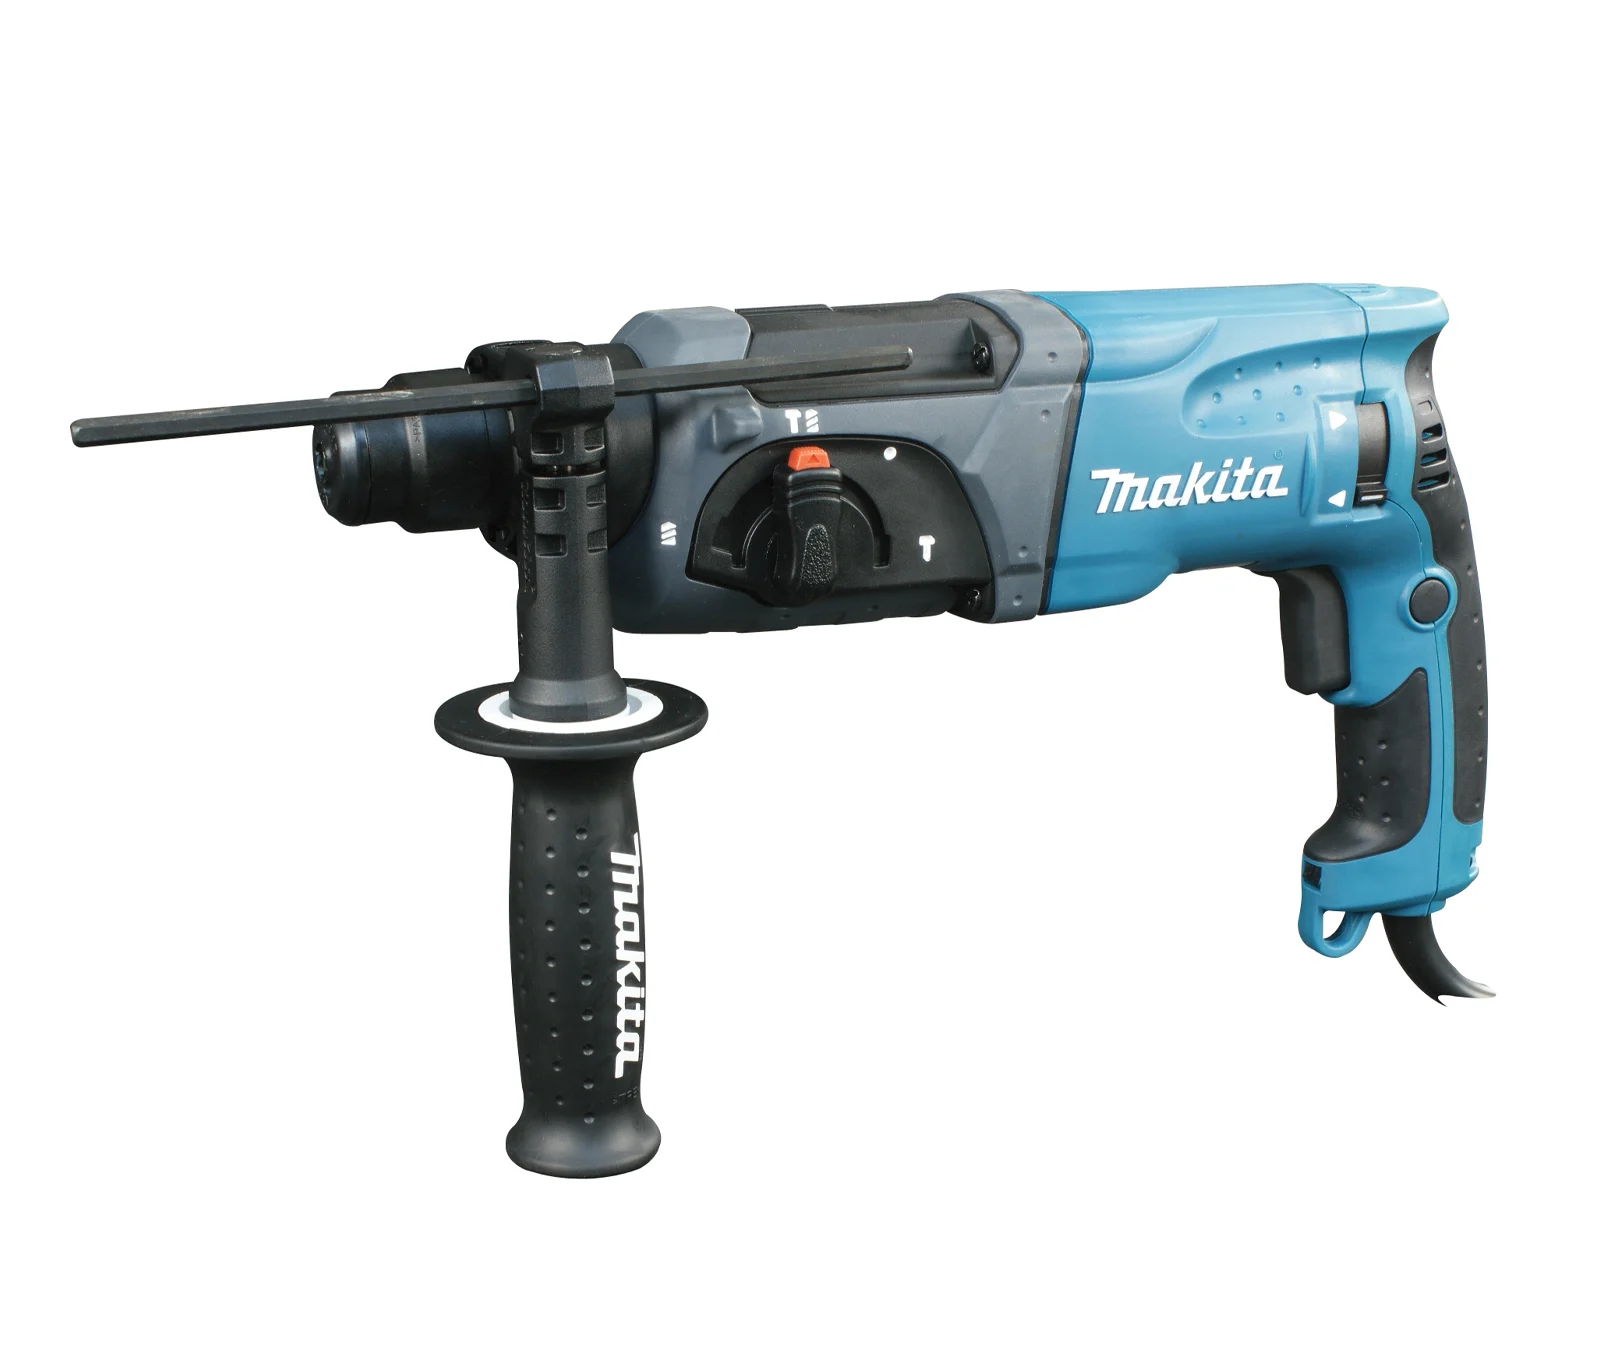 Rotary SDS power drill